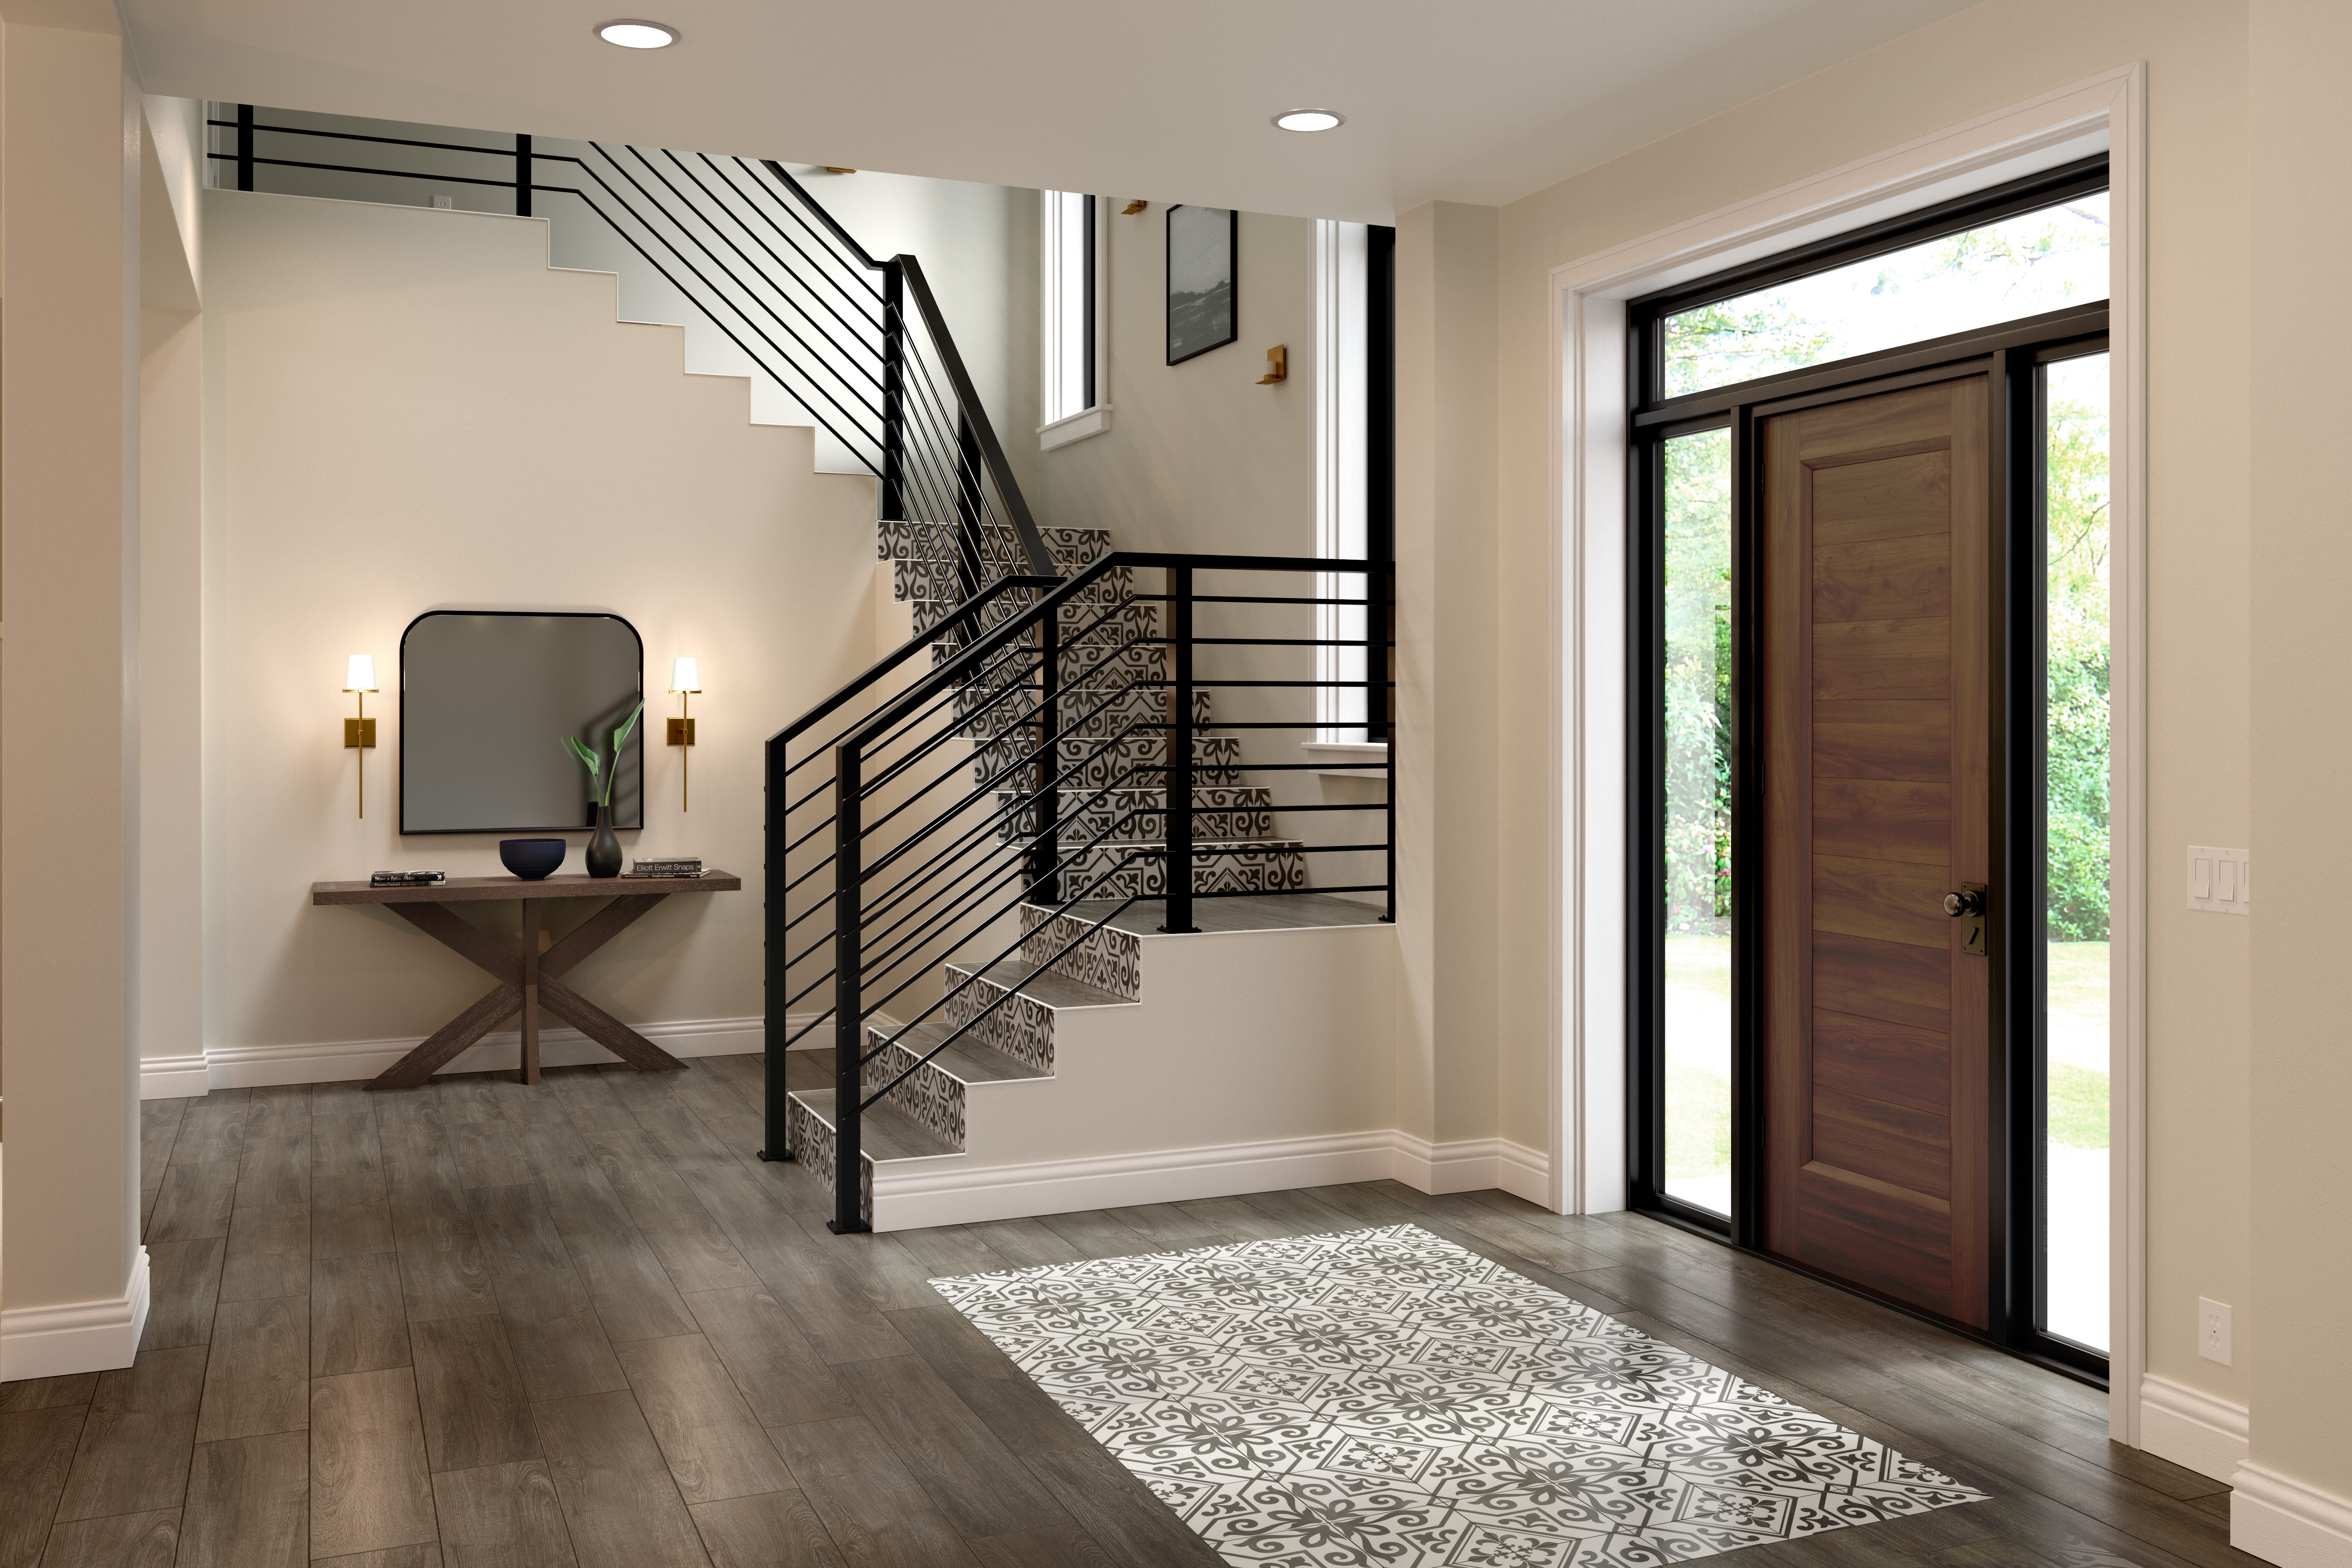 Wood-look Porcelain near home entry way featuring nook and iron rod staircase in background